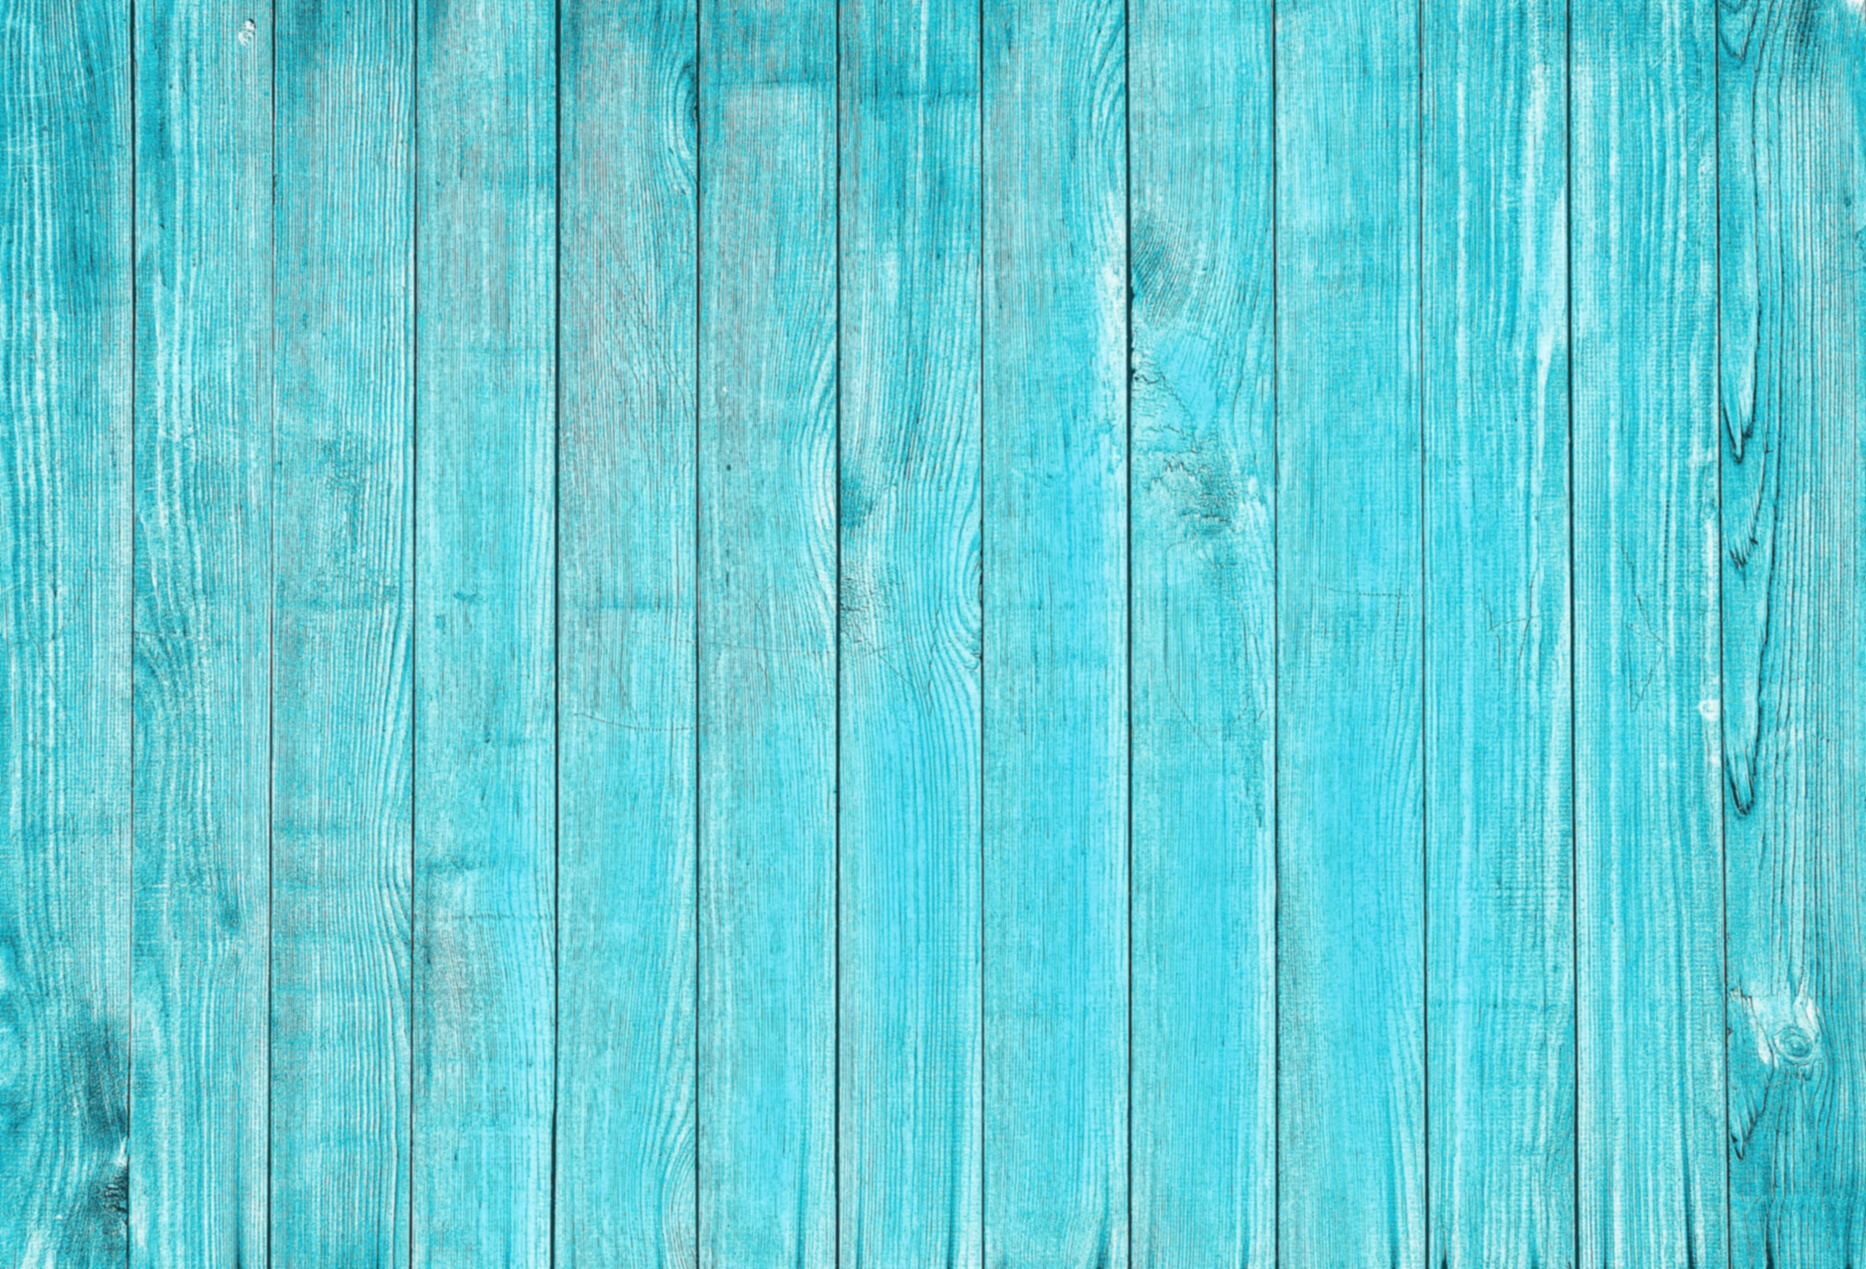 Turquoise Wooden Background